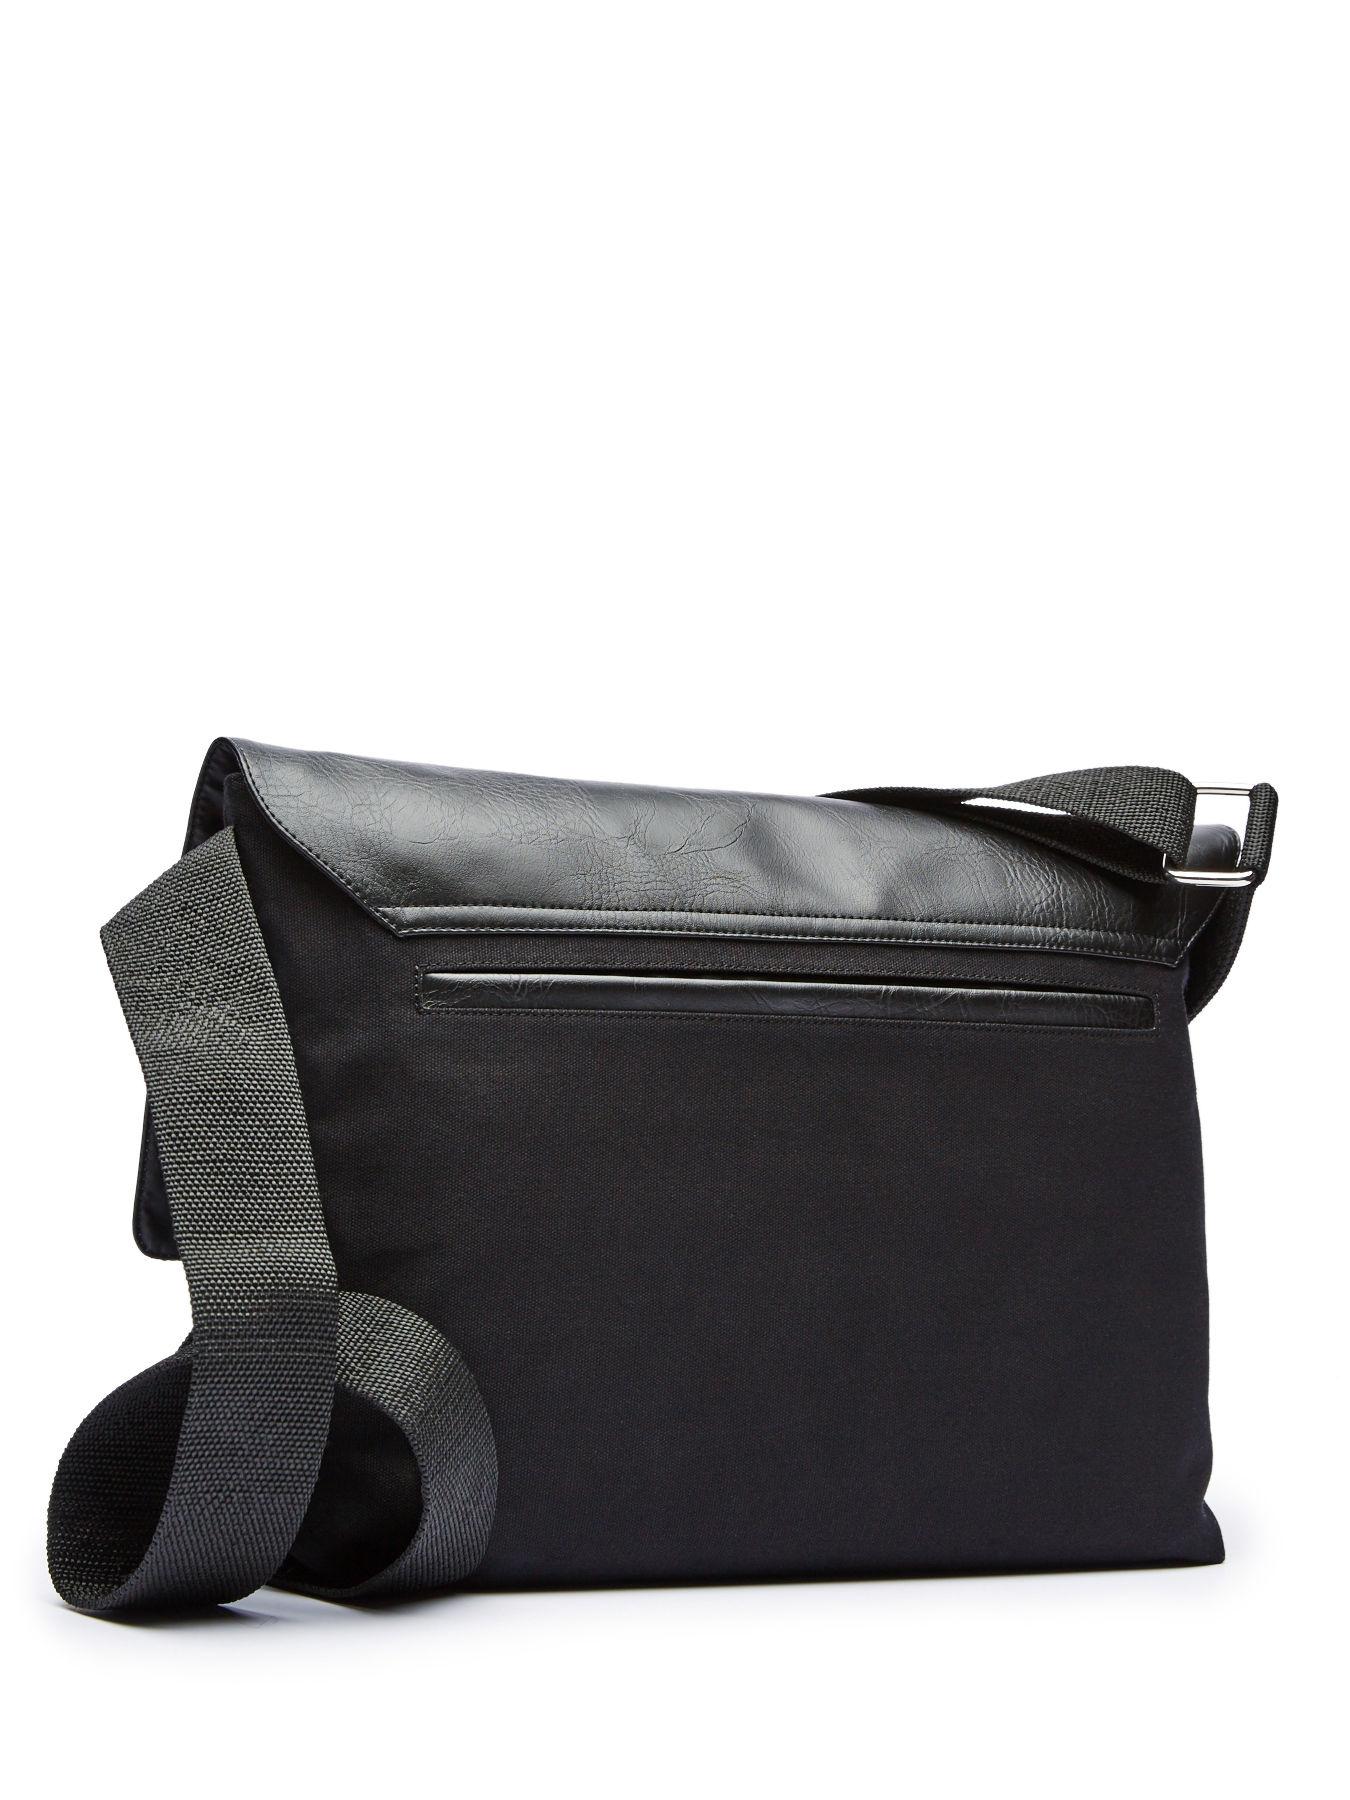 Perry Ellis Leather And Canvas Messenger Bag in Black for Men - Lyst